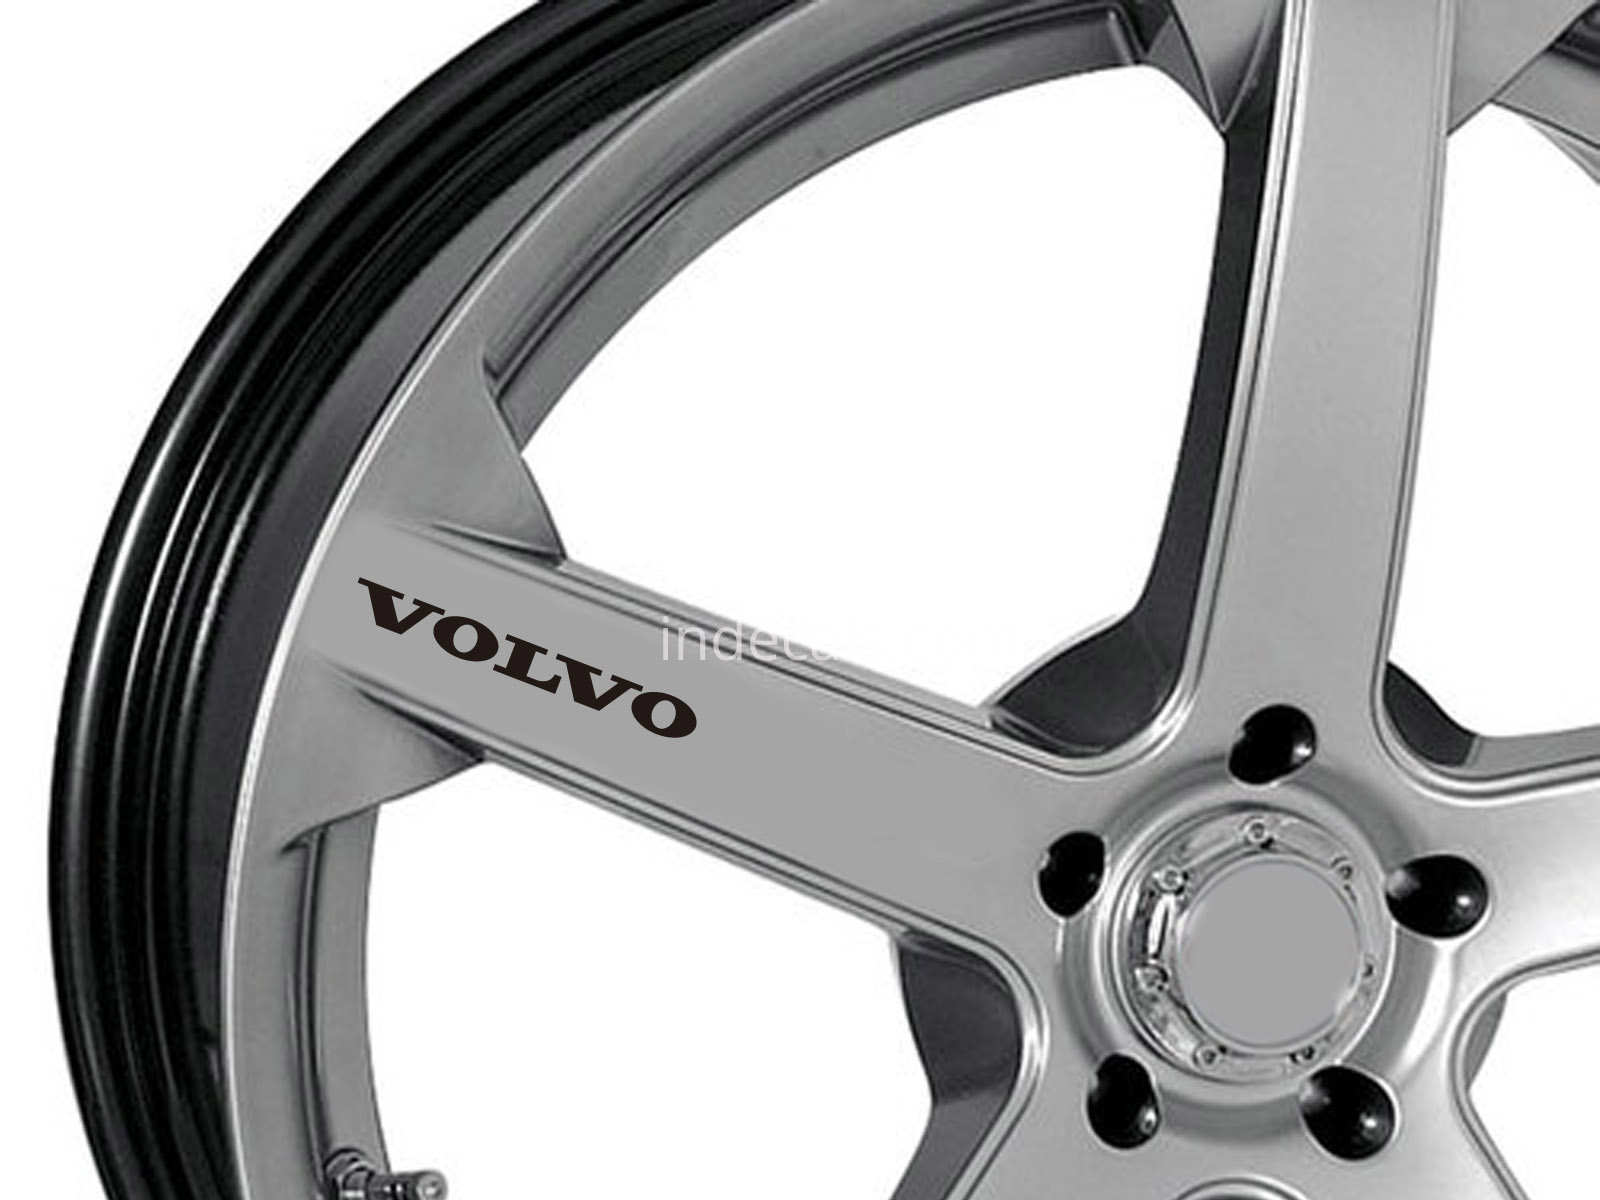 6 x Volvo Stickers for Wheels - Black